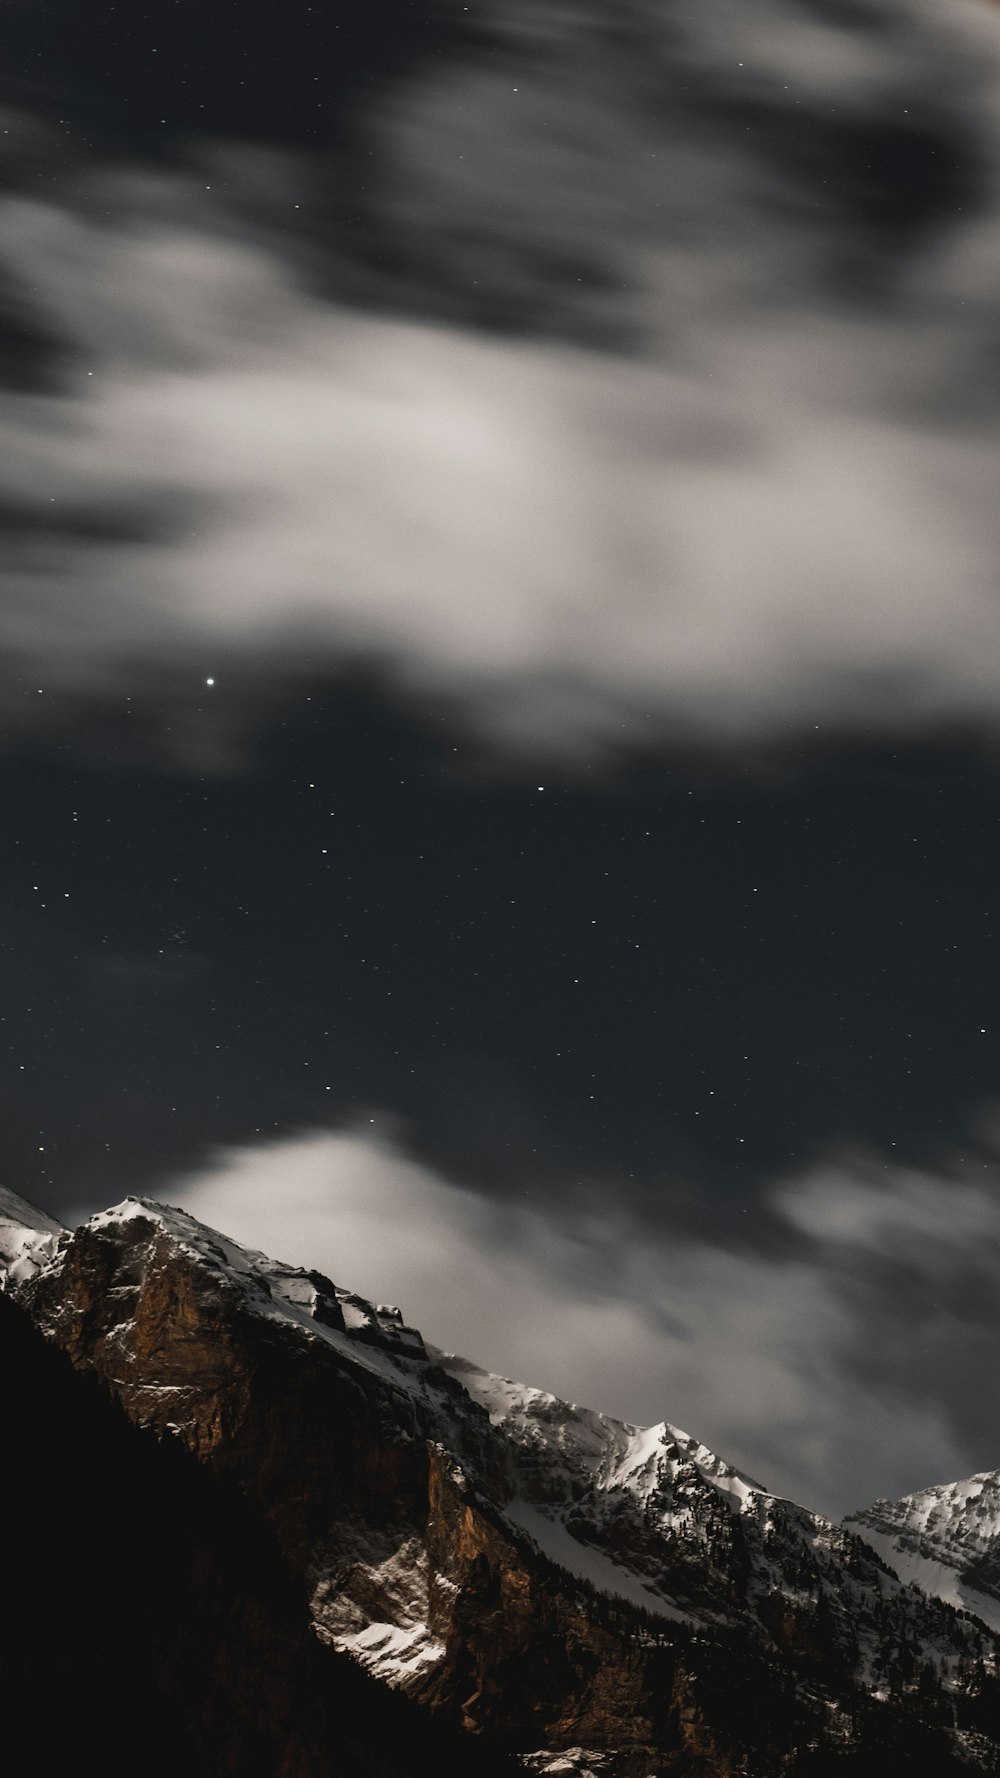 a night sky with stars and clouds over a mountain